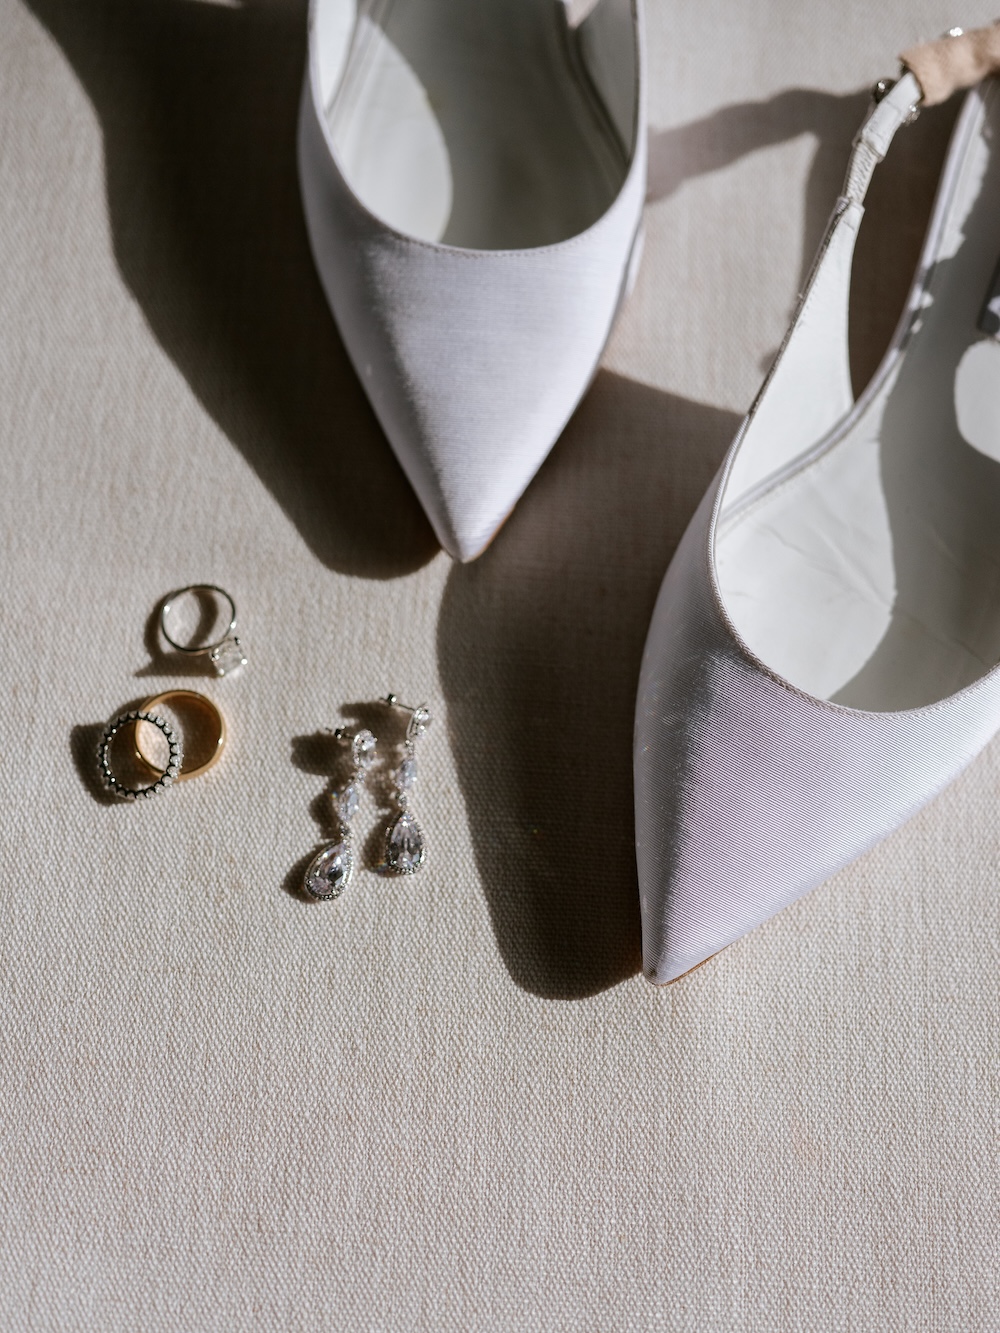 Simple elegant bridal heels and jewelry. Modern Washington DC wedding at National Museum of Women in the Arts. Sarah Bradshaw Photography.